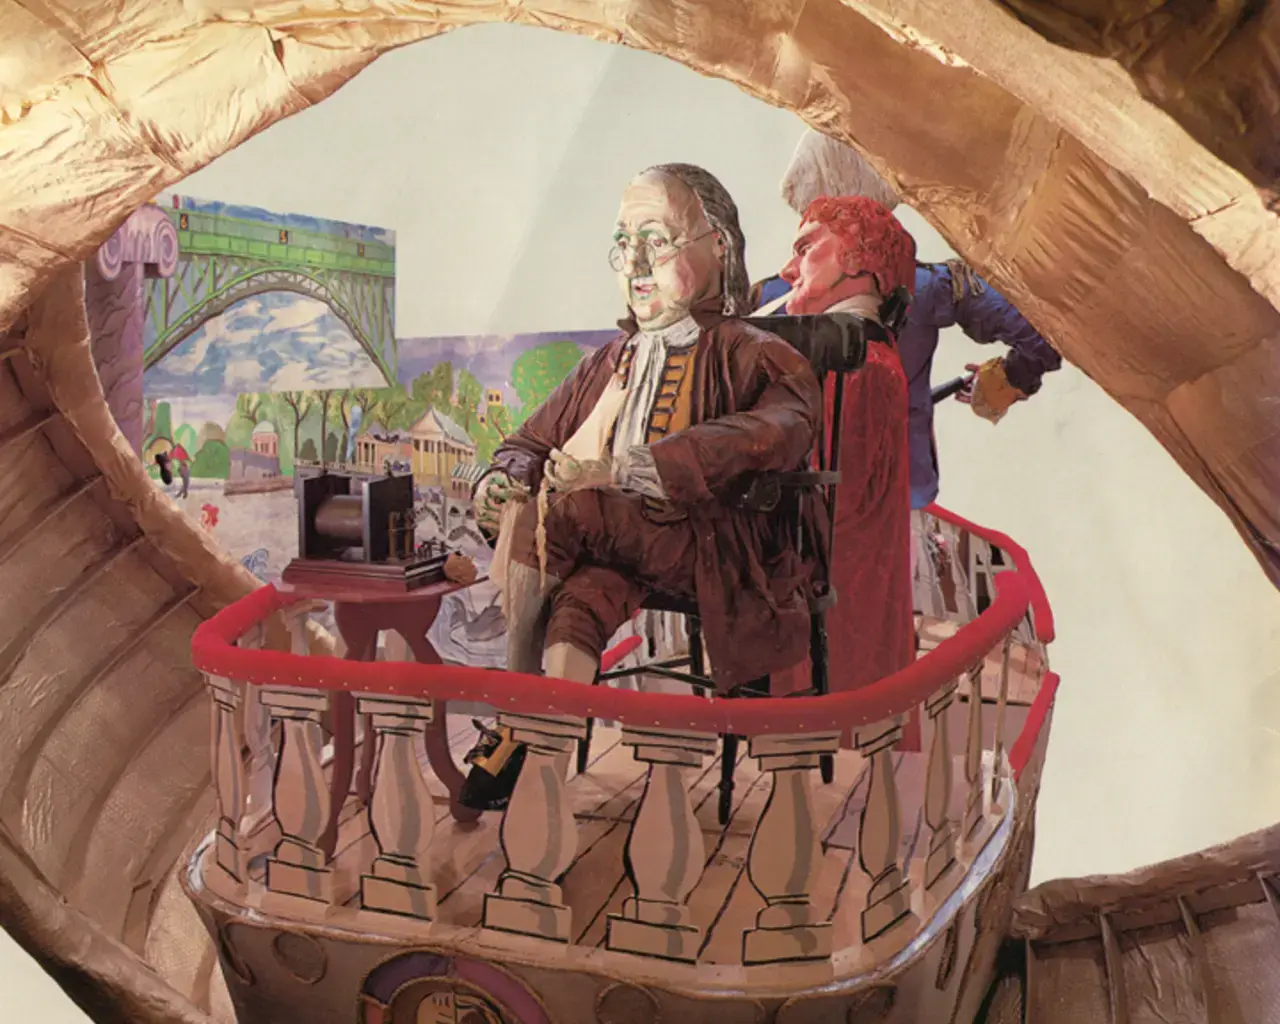 George Washington, the central figure to Philadelphia Cornucopia, a mixed media environment created in 1982 by Red Grooms. Photo by Judy Dion for the Pennsylvania Academy of the Fine Arts.